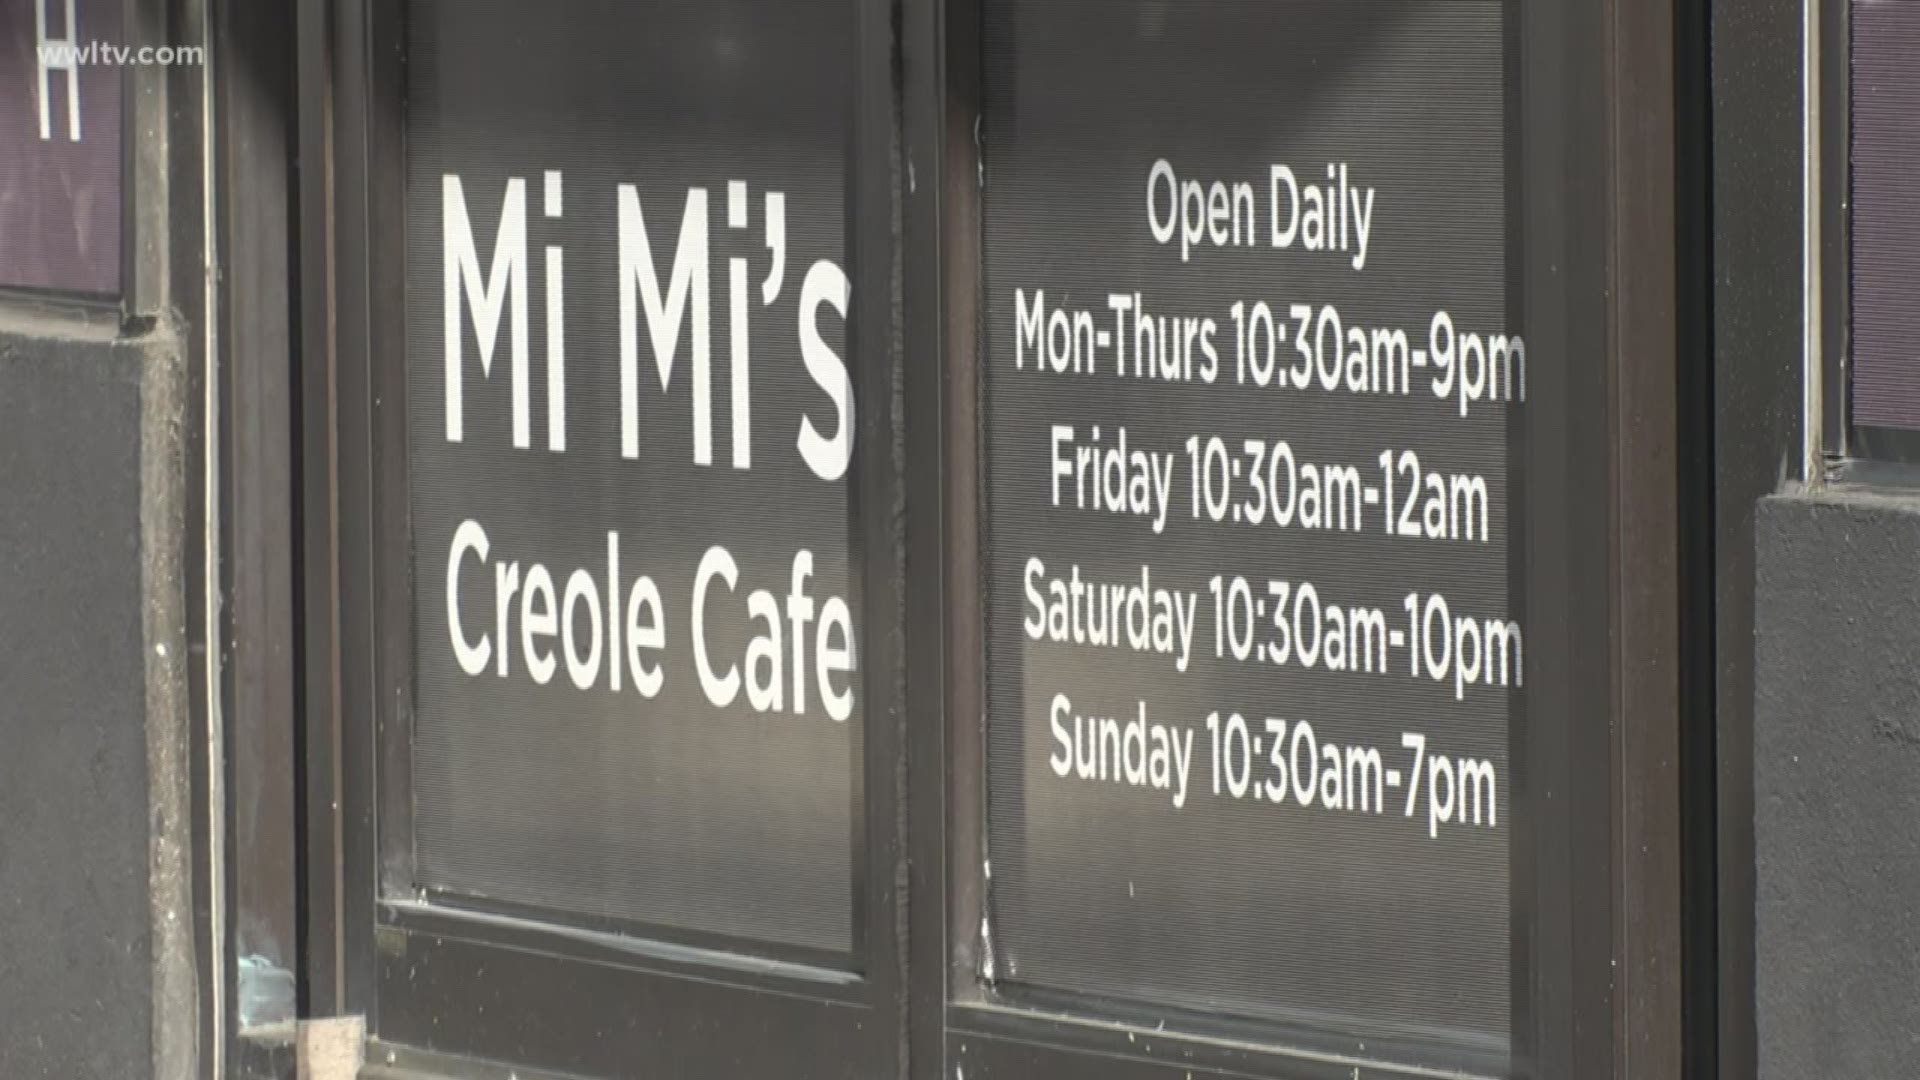 According to the NAACP of Terrebonne Parish, the owner of Mimi’s in Houma is the first female African-American restaurant owner to have a spot on Main Street.